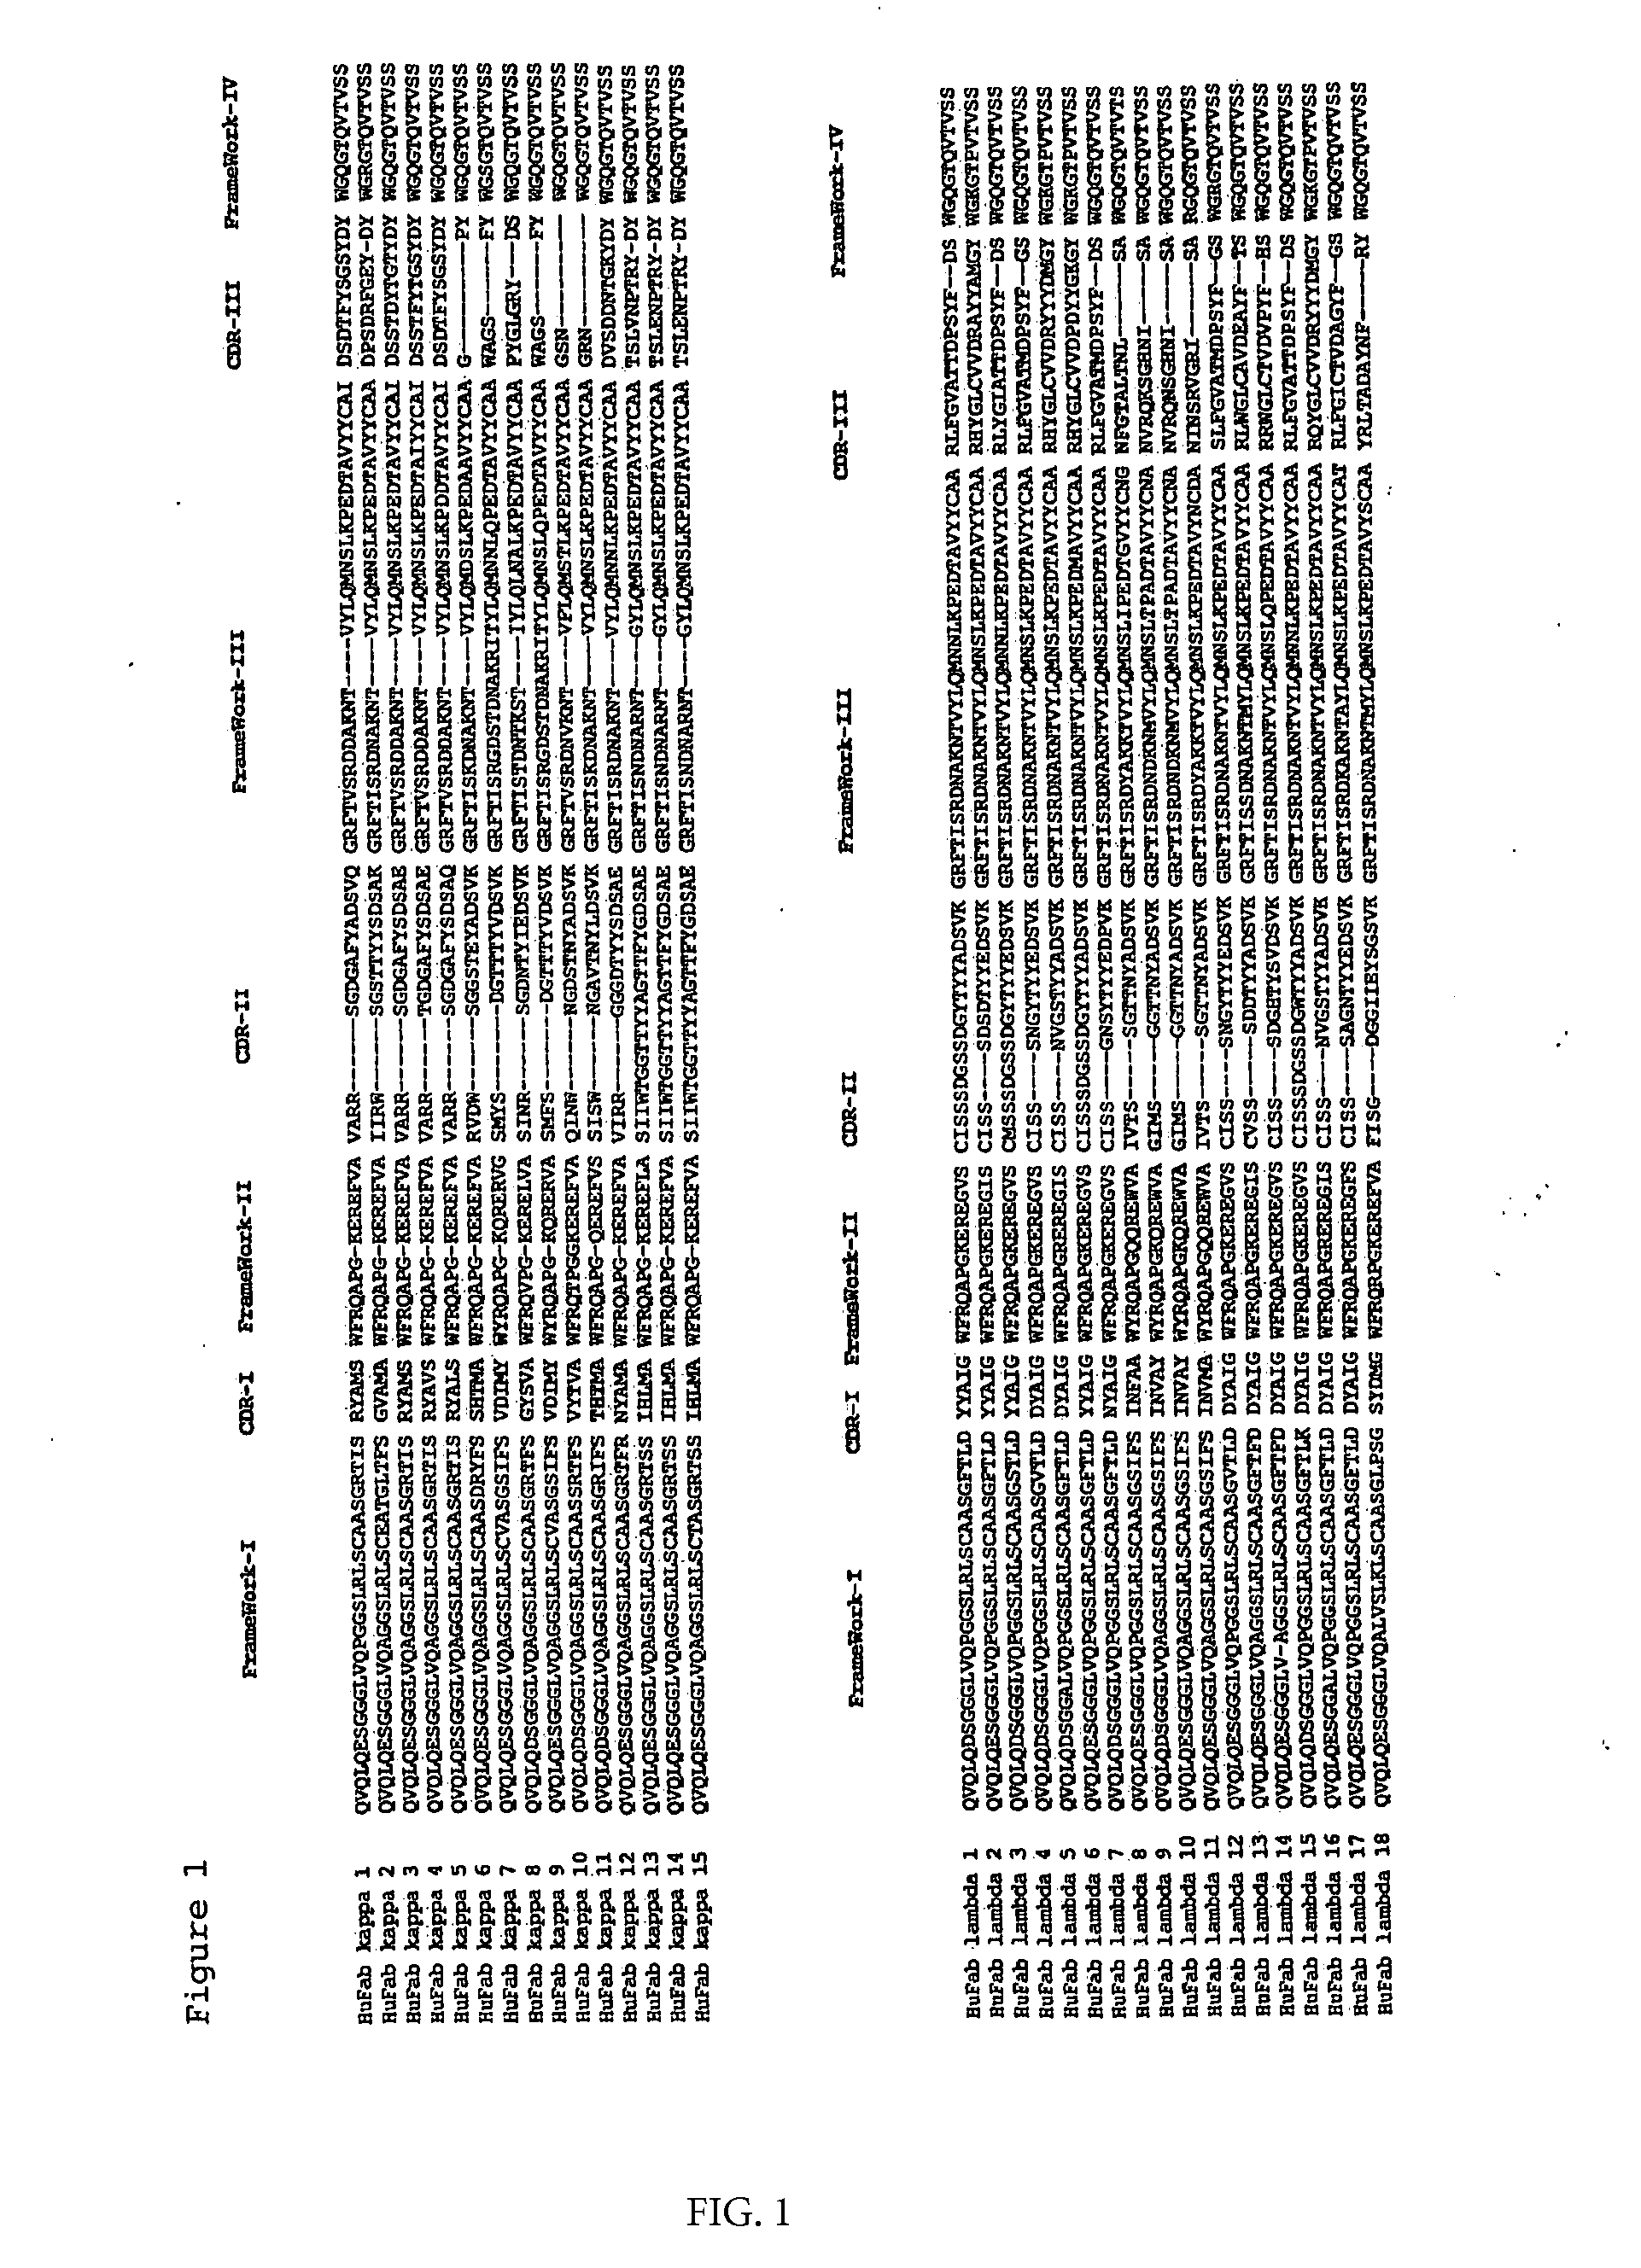 Method for affinity purification